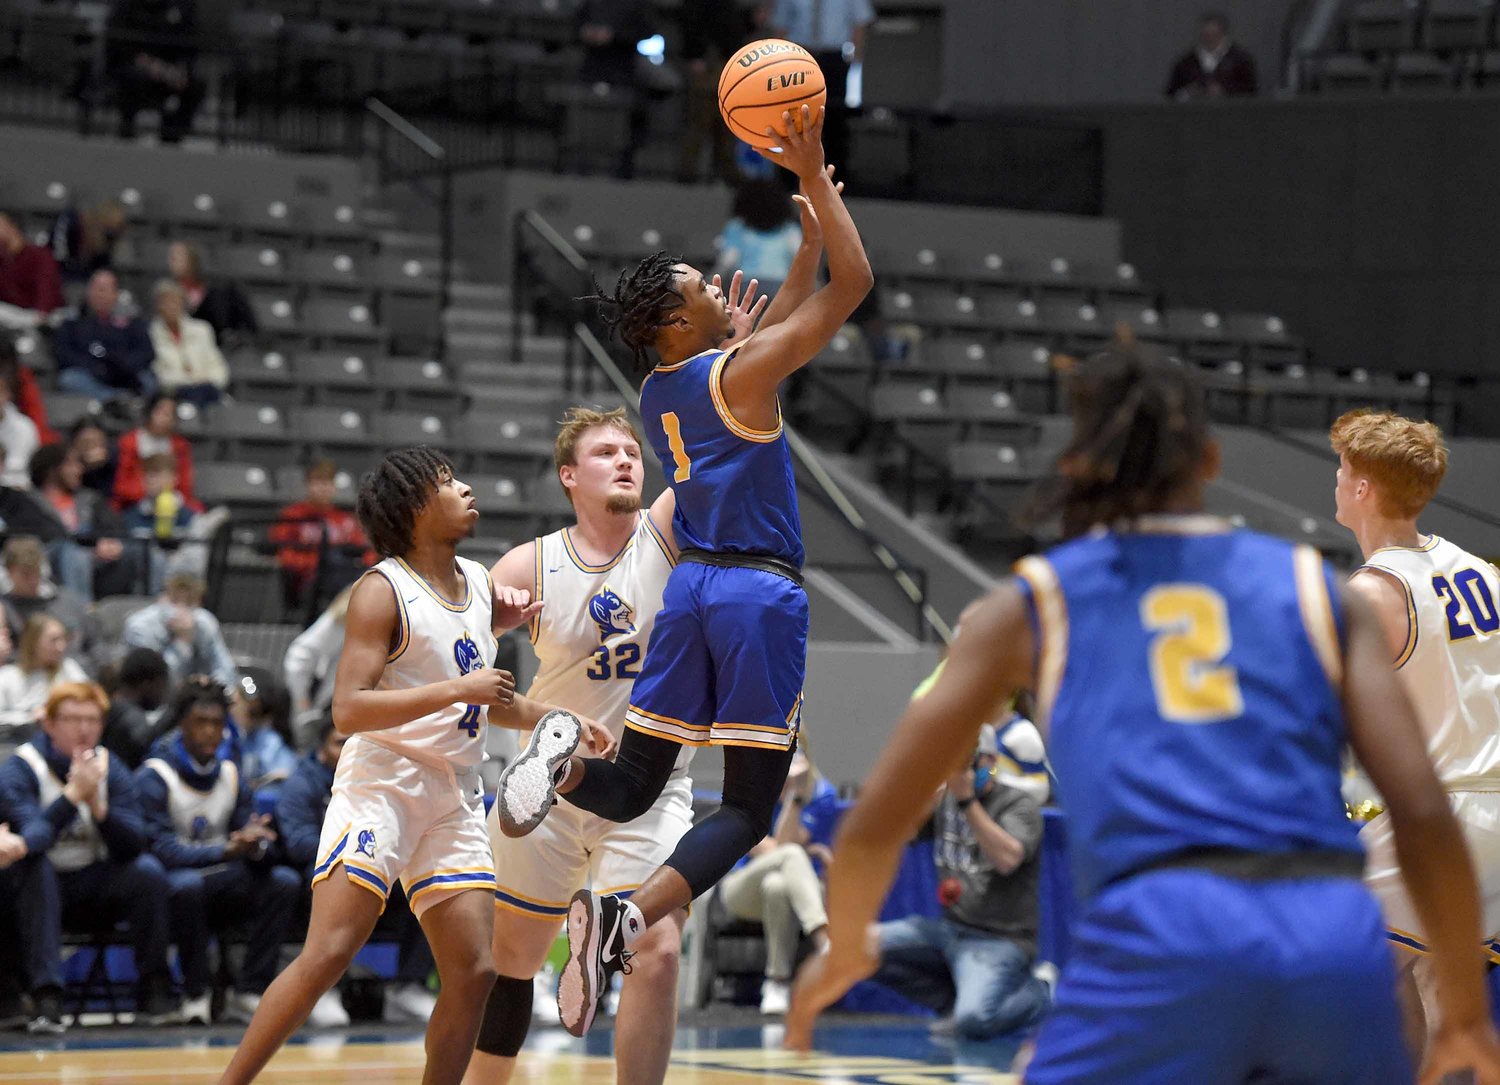 Kemper County's James Granger (1) shoots against Booneville at the MHSAA State Basketball Tournament  semifinals on Wednesday, March 3, 2021, at the Mississippi Coliseum in Jackson, Miss.